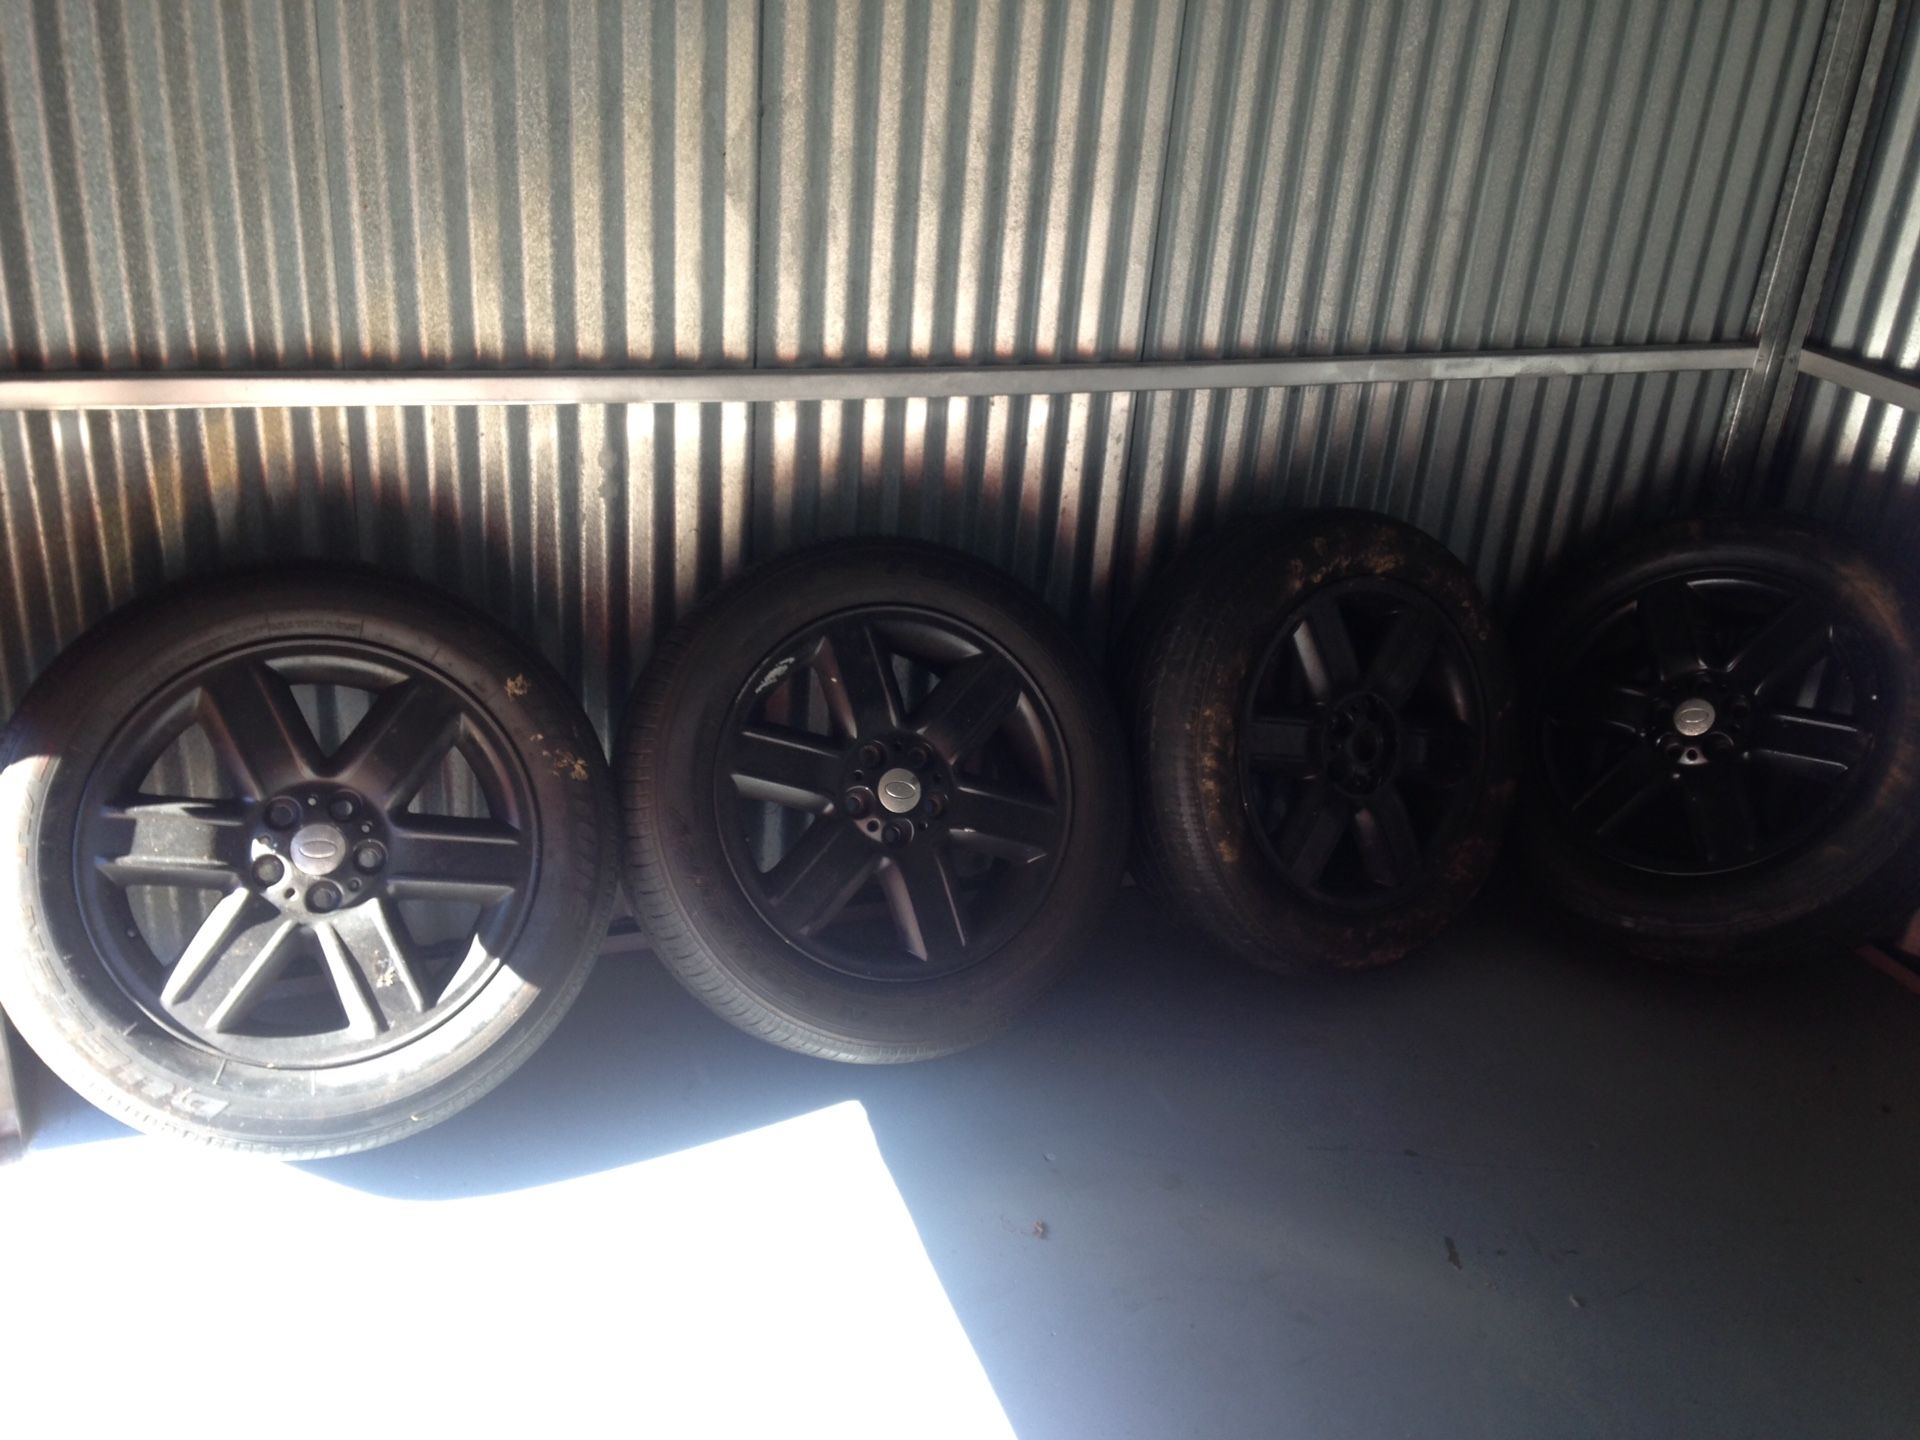 Four(4) 245/55R19 Wheels (Rims & Tires) Five(5) Lugs $99 obo. Tires are shot no good Fit Land Rover